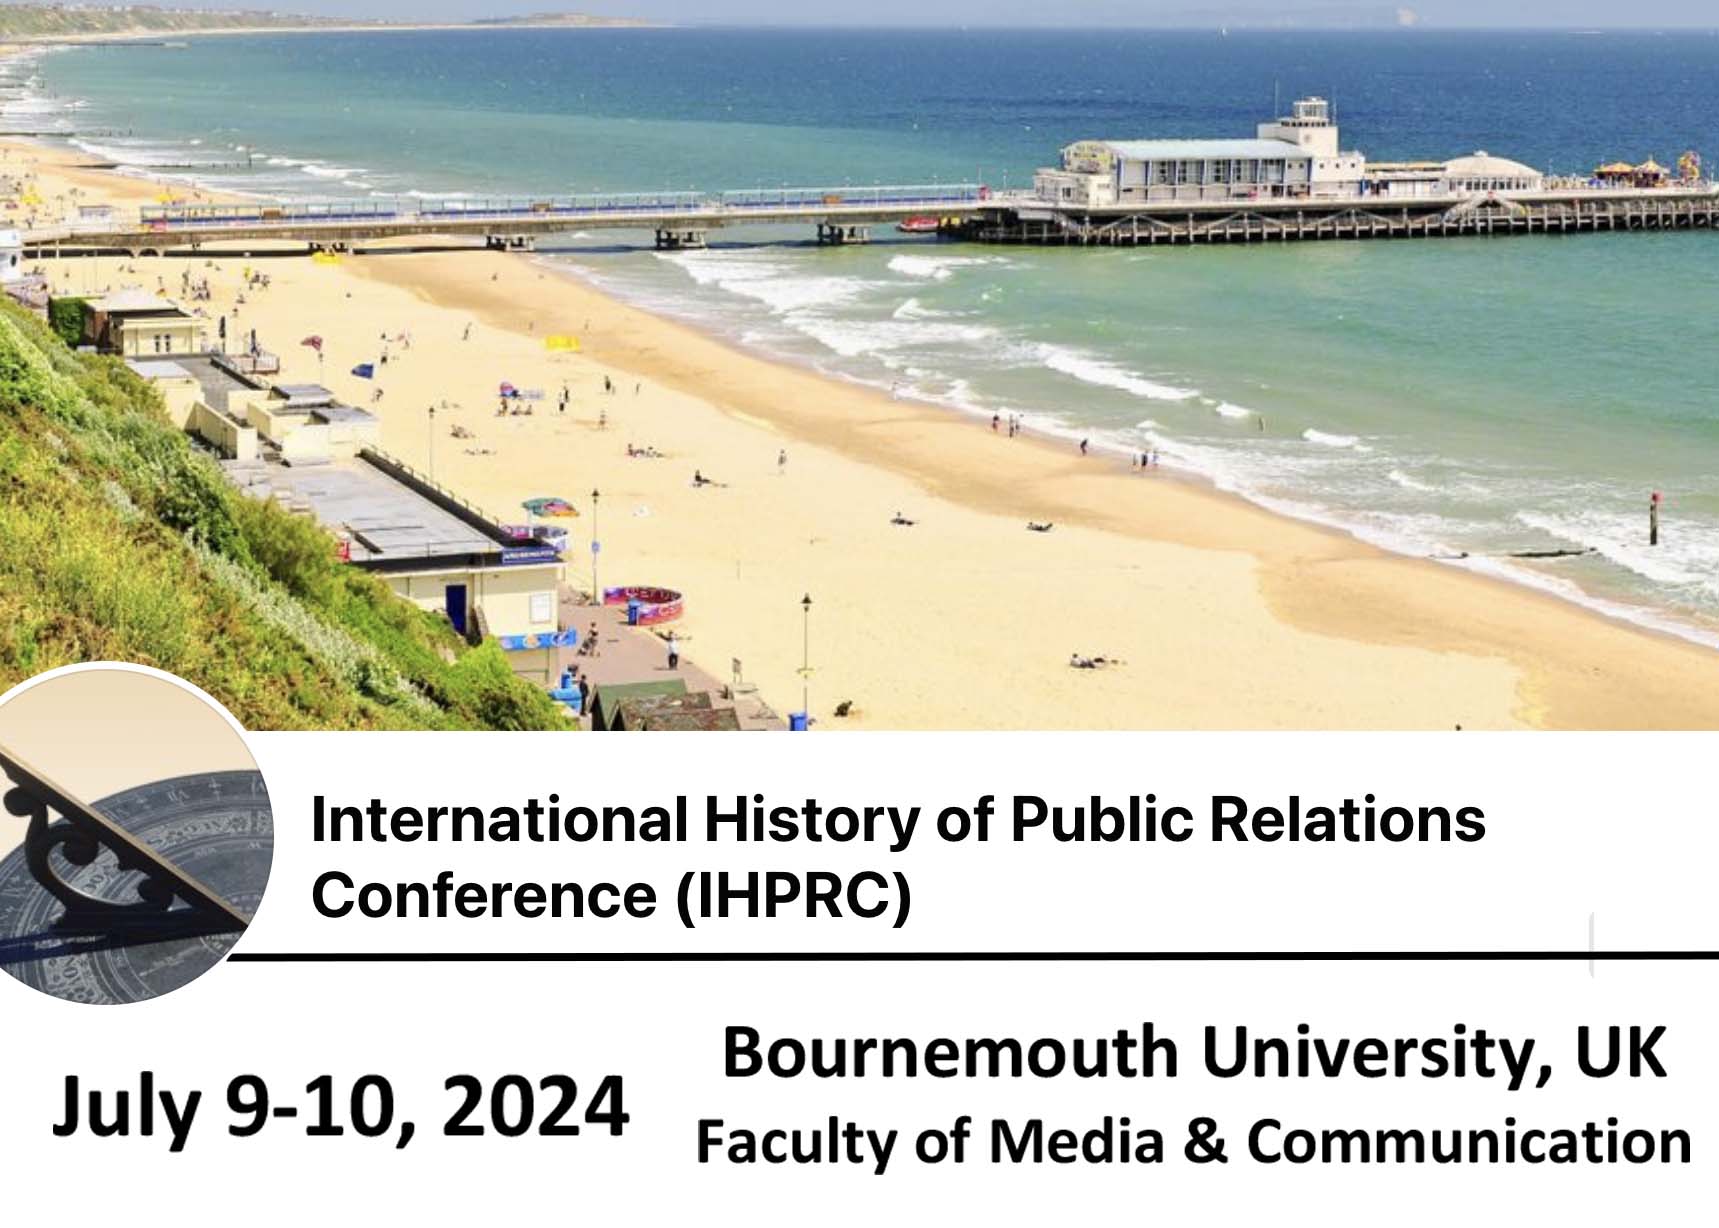 Call for Papers – The International History of Public Relations Conference (July 9-10, 2024)